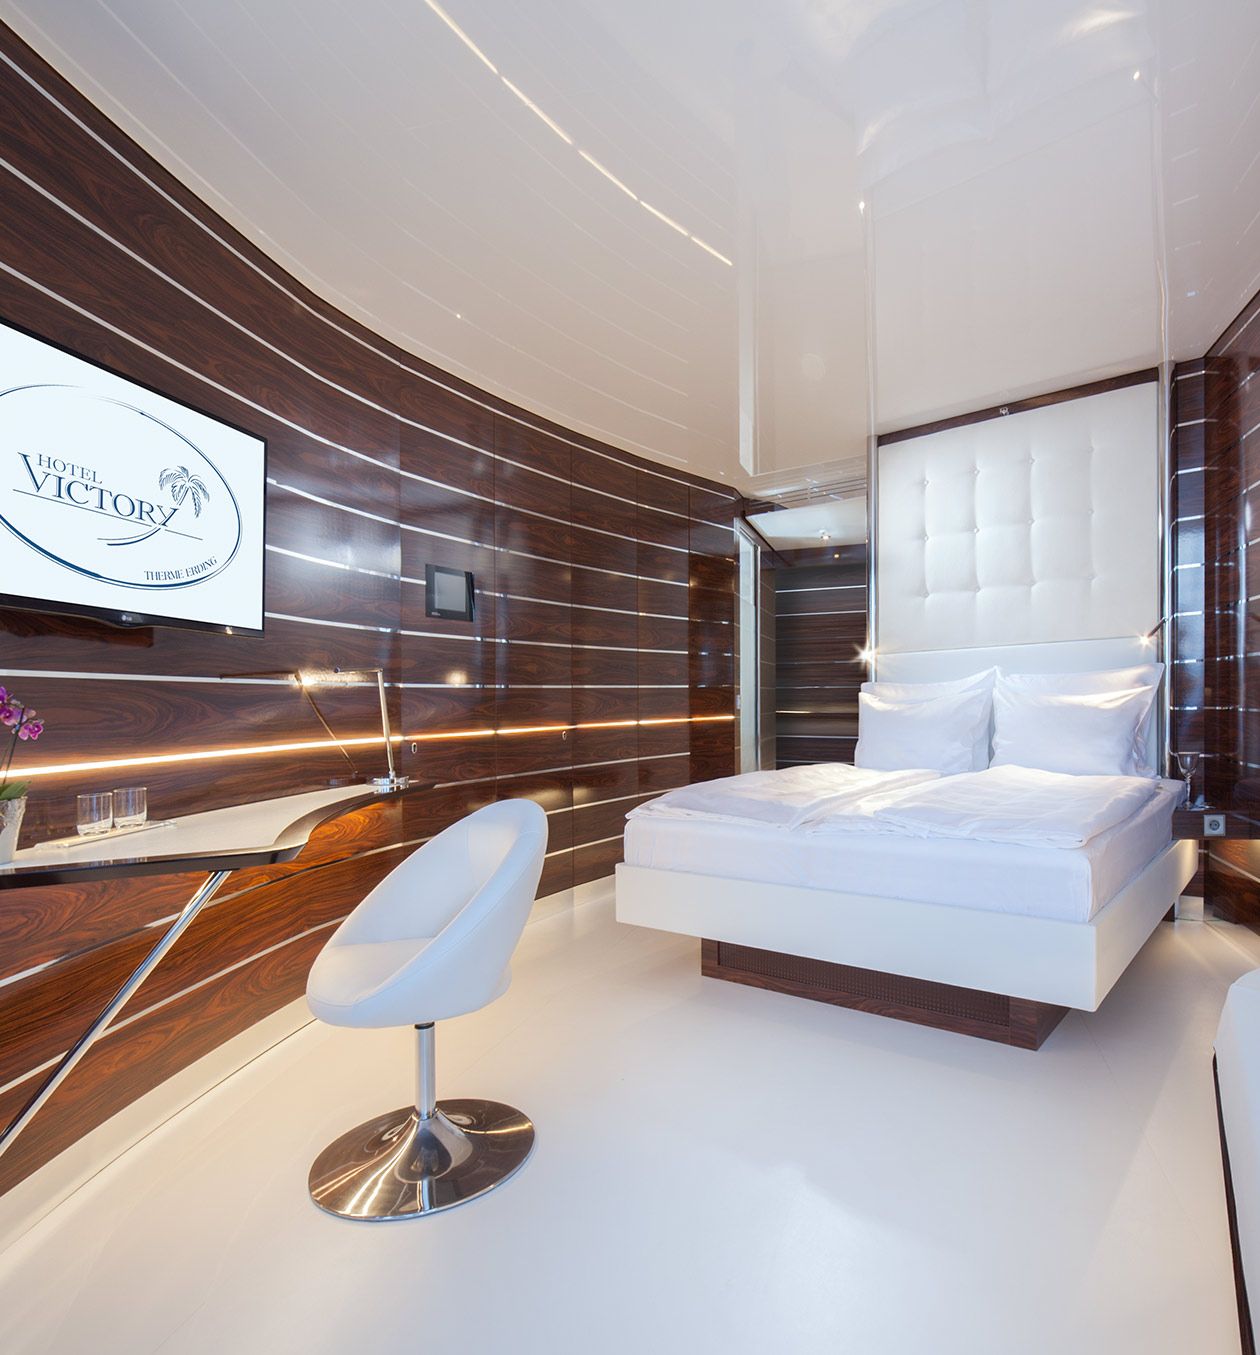 luxurious hotel room in the design of a yacht cabin